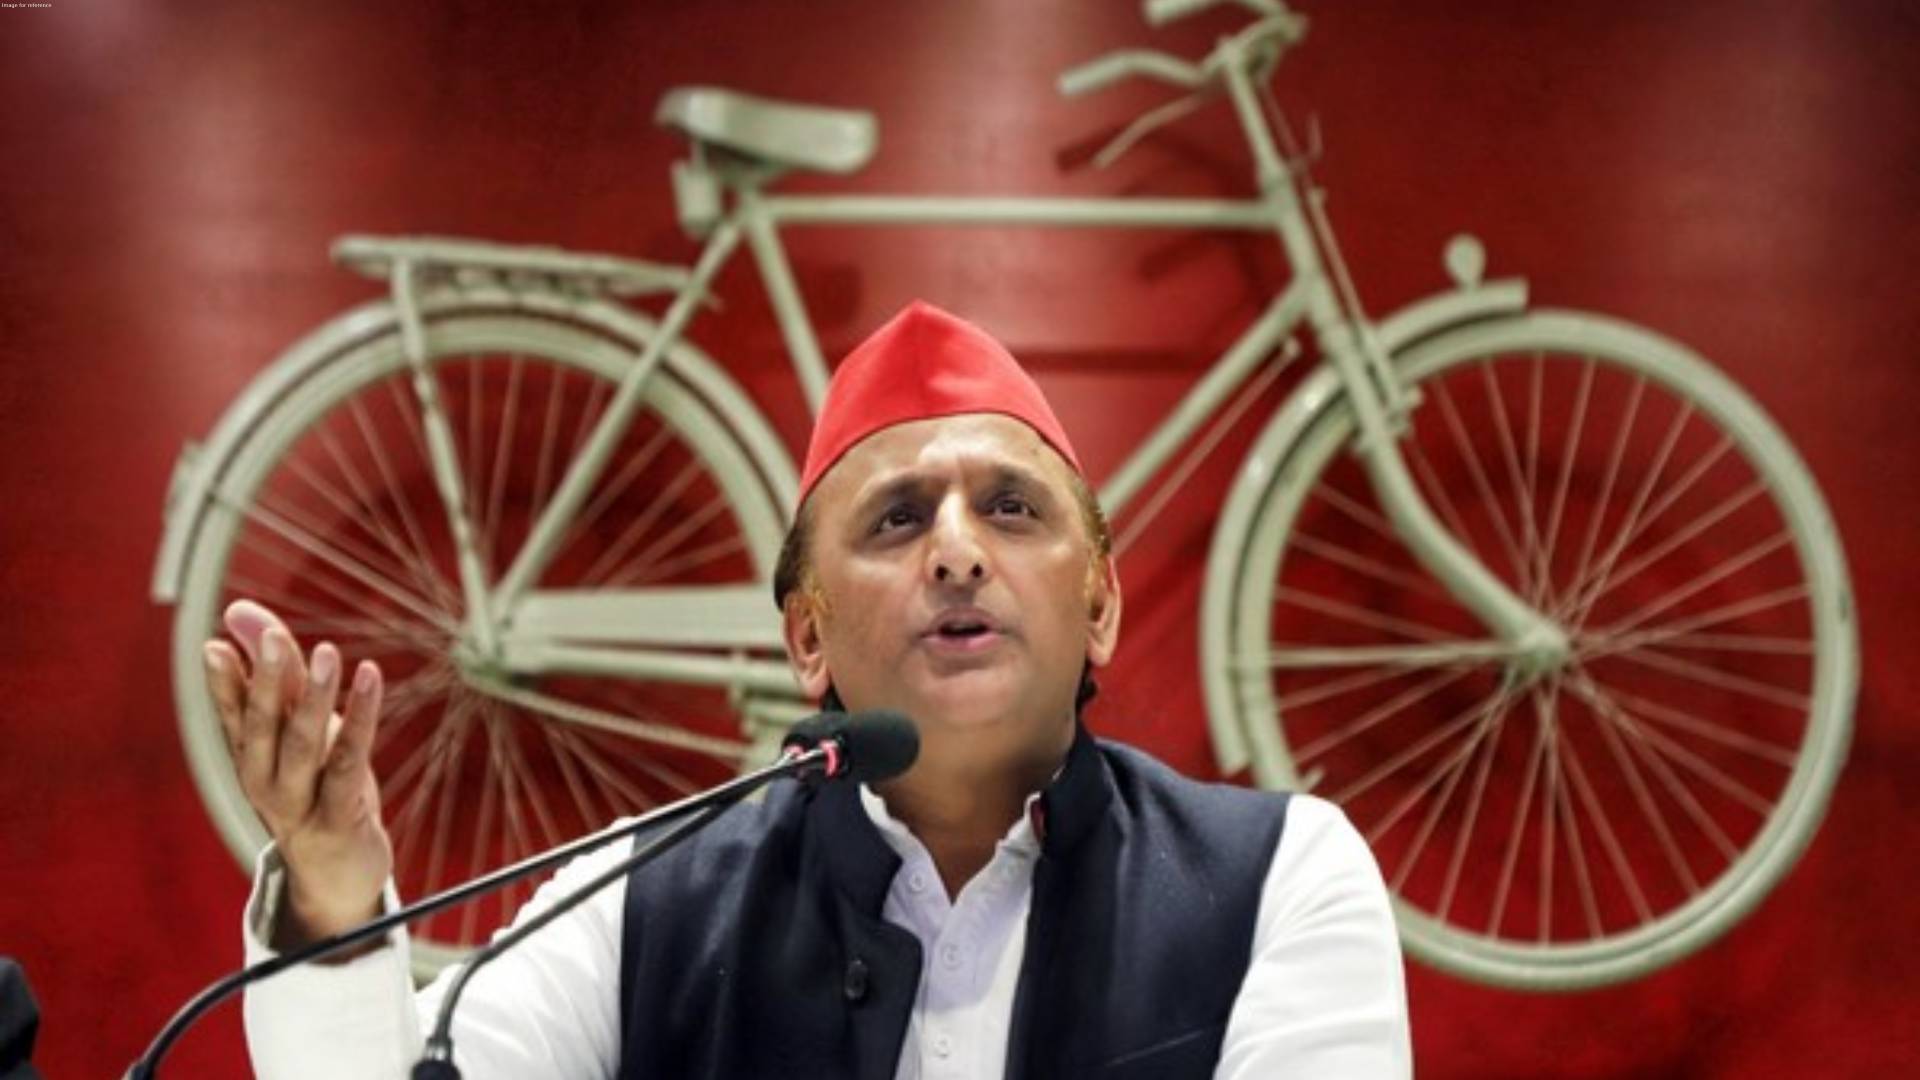 Akhilesh Yadav lashes out at Centre over unemployment after Indian man dies in Israel